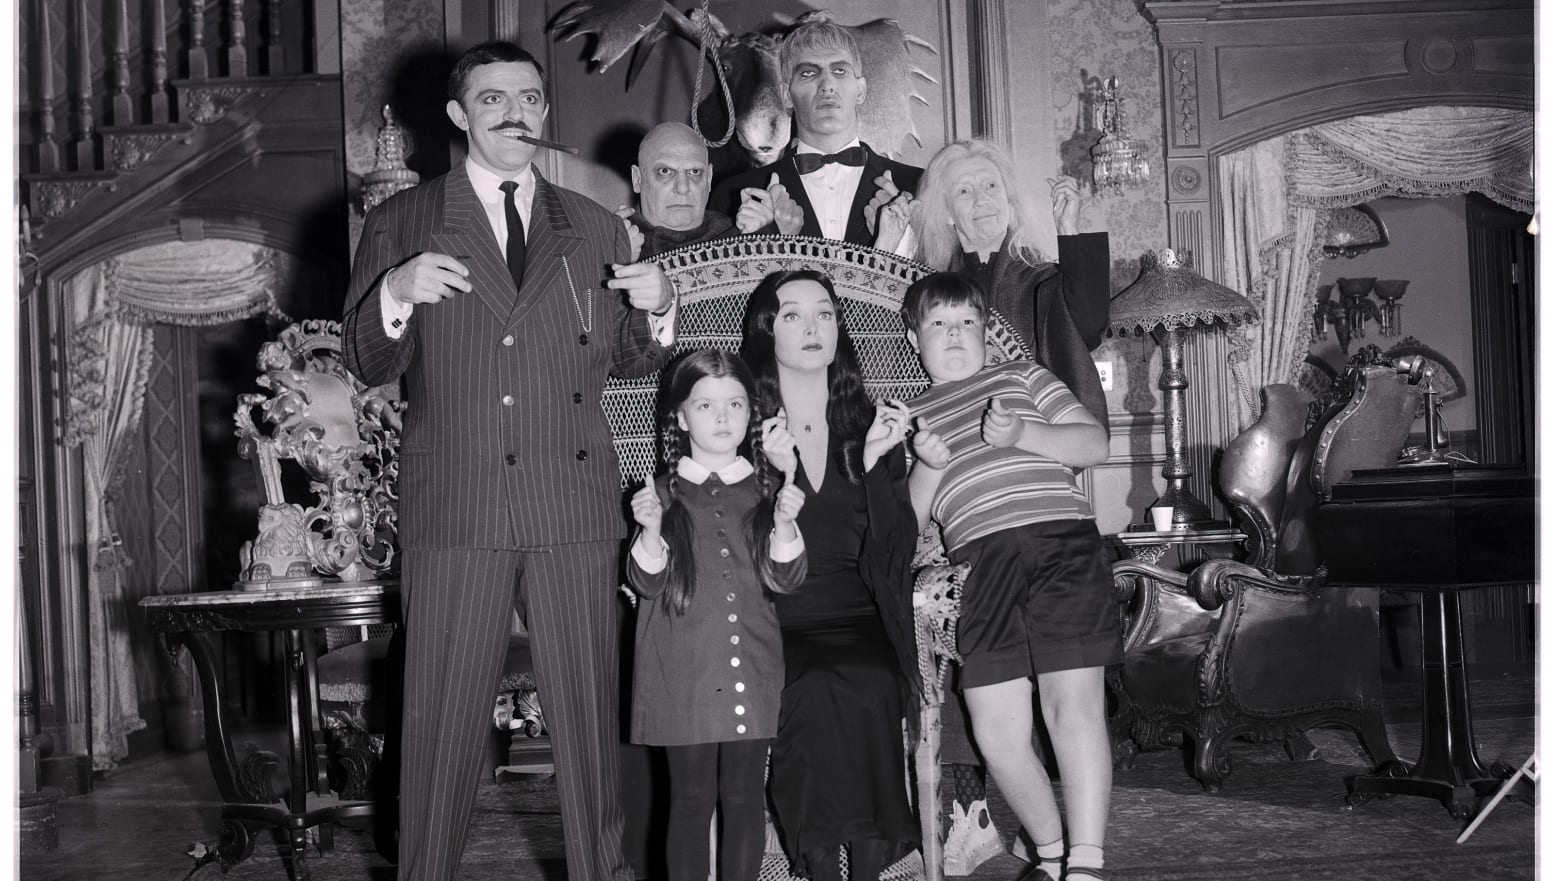 The cast of The Addams Family in an episode titled "Uncle Fester's Toupee" which aired April 30, 1965.